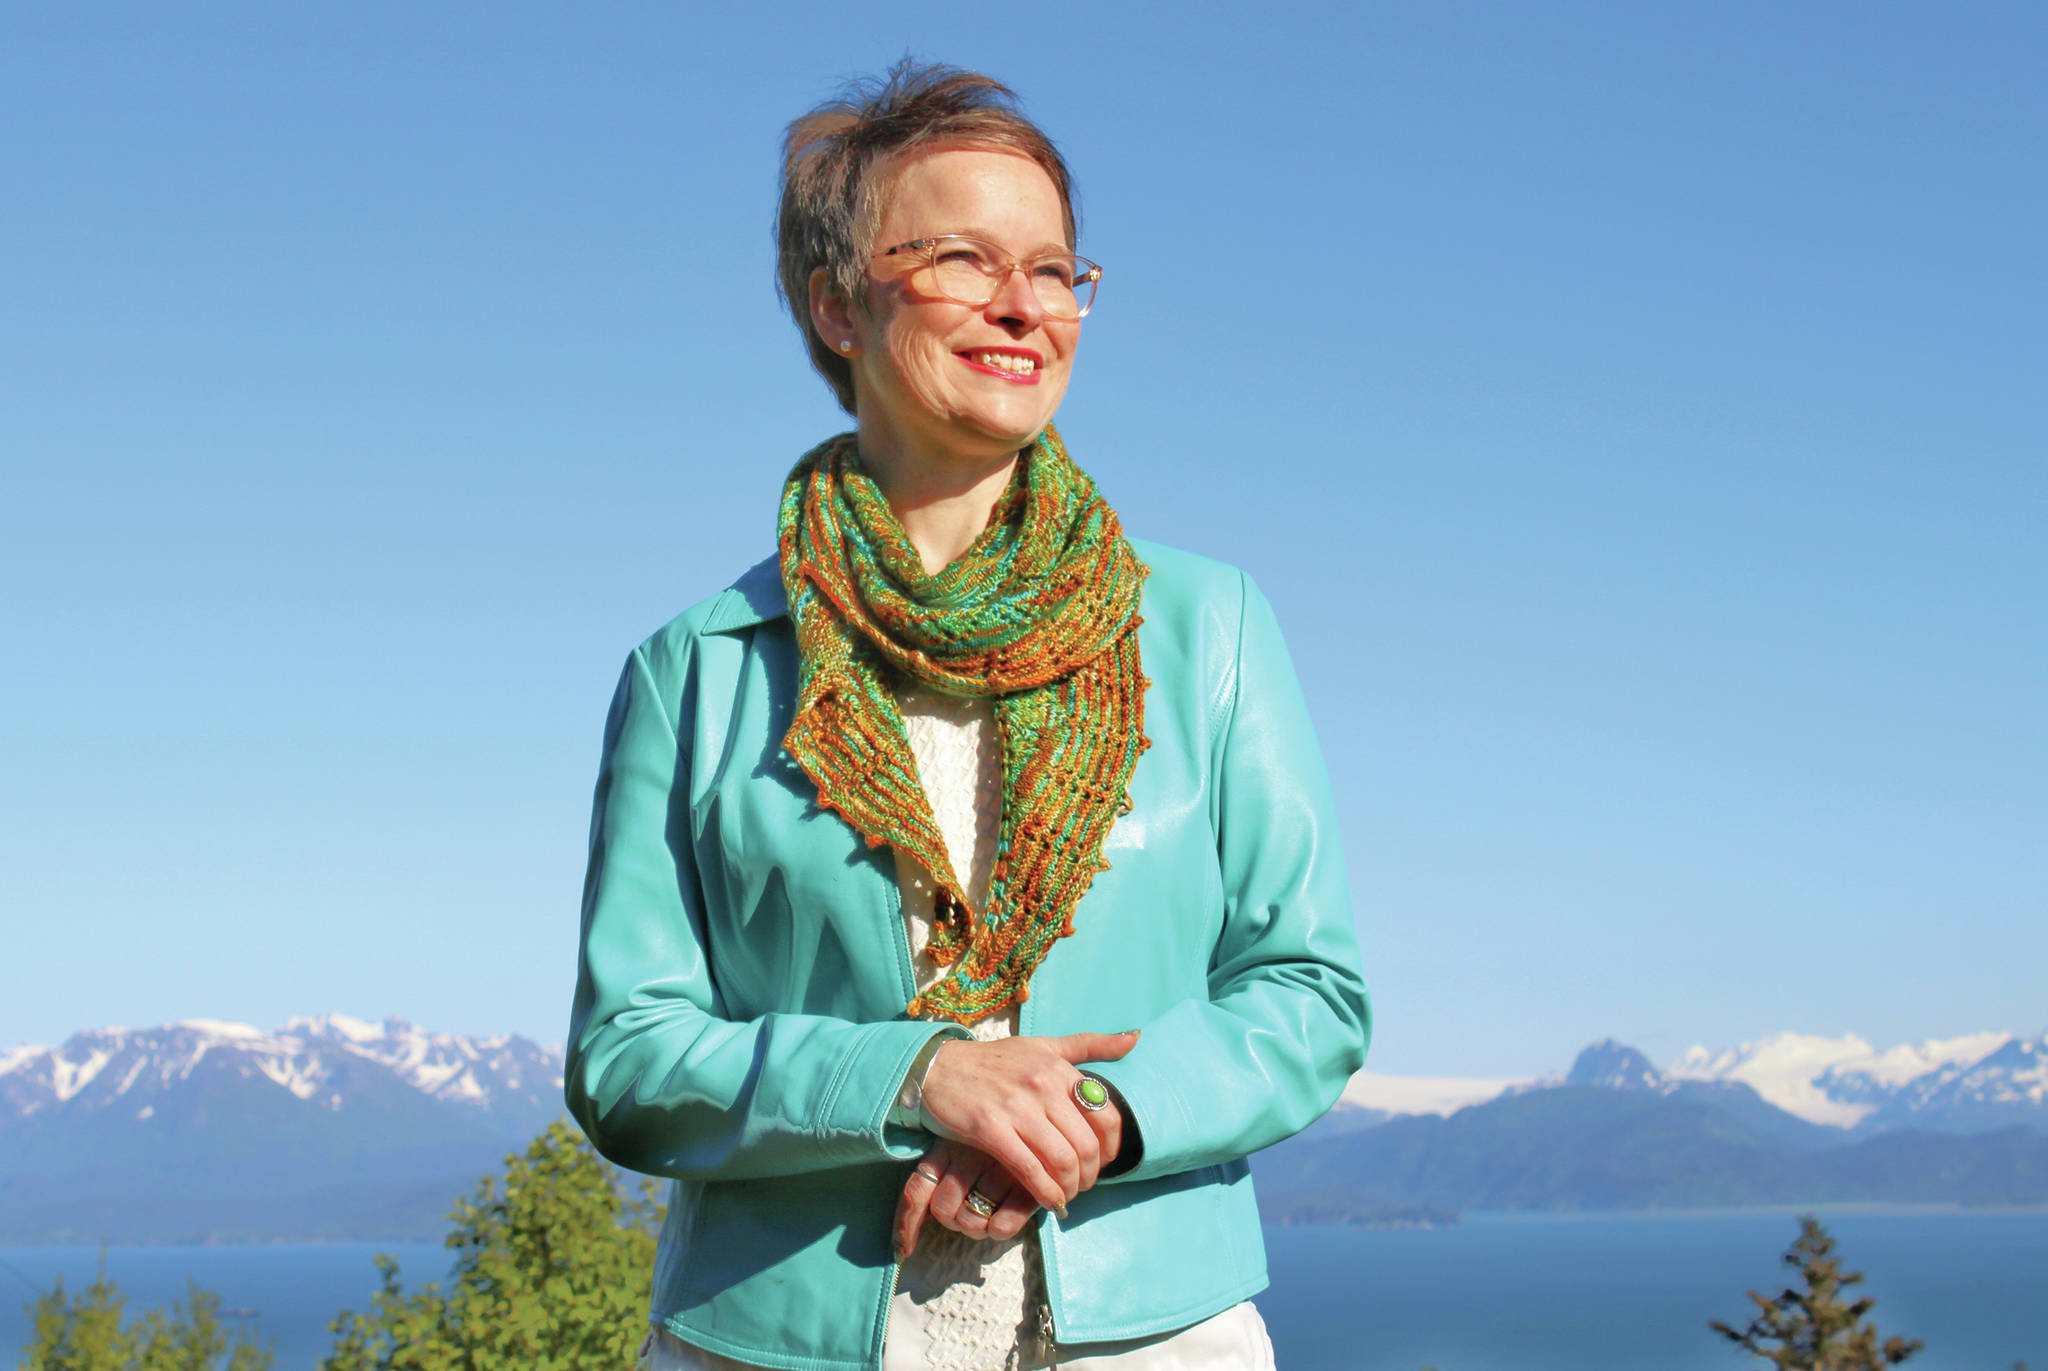 Rep. Sarah Vance (R-Homer) poses for a photo on June 12, 2020, in Homer, Alaska. (Photo by Hannah Vance)